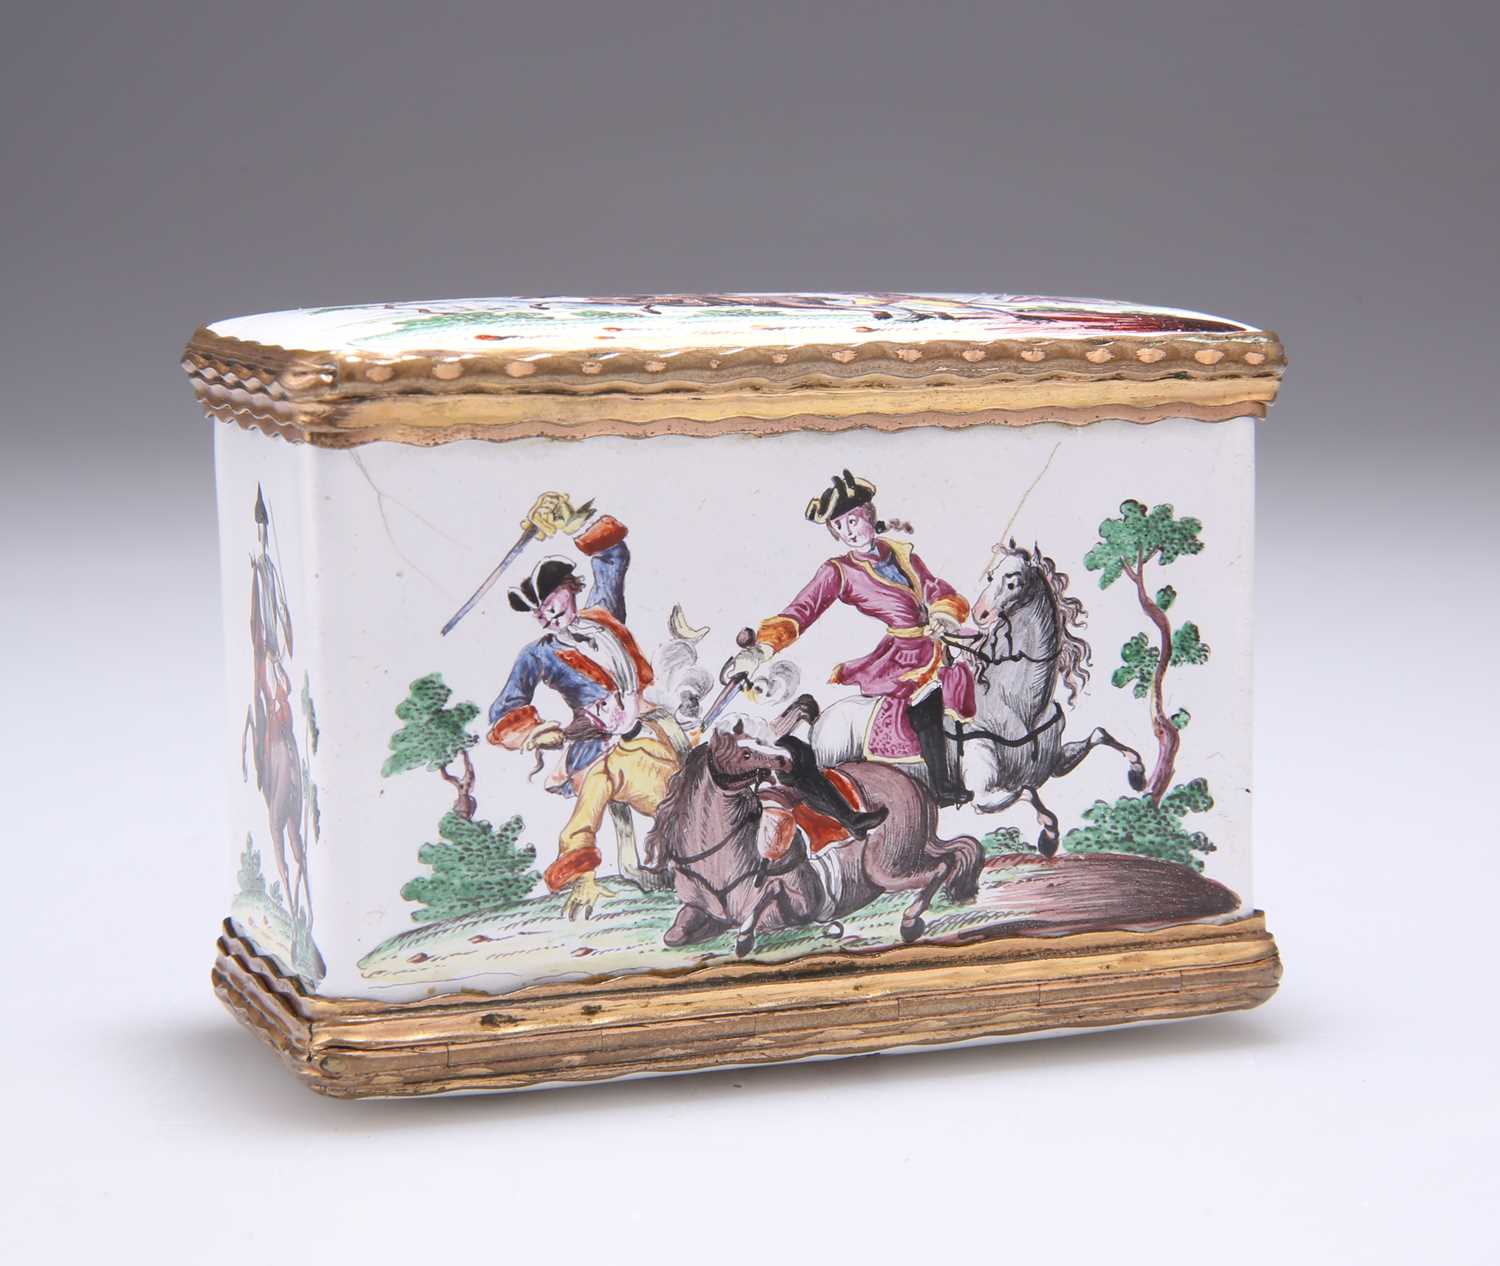 A RARE GERMAN ENAMEL DOUBLE-OPENING SNUFF BOX, FREDERICK THE GREAT, CIRCA 1730